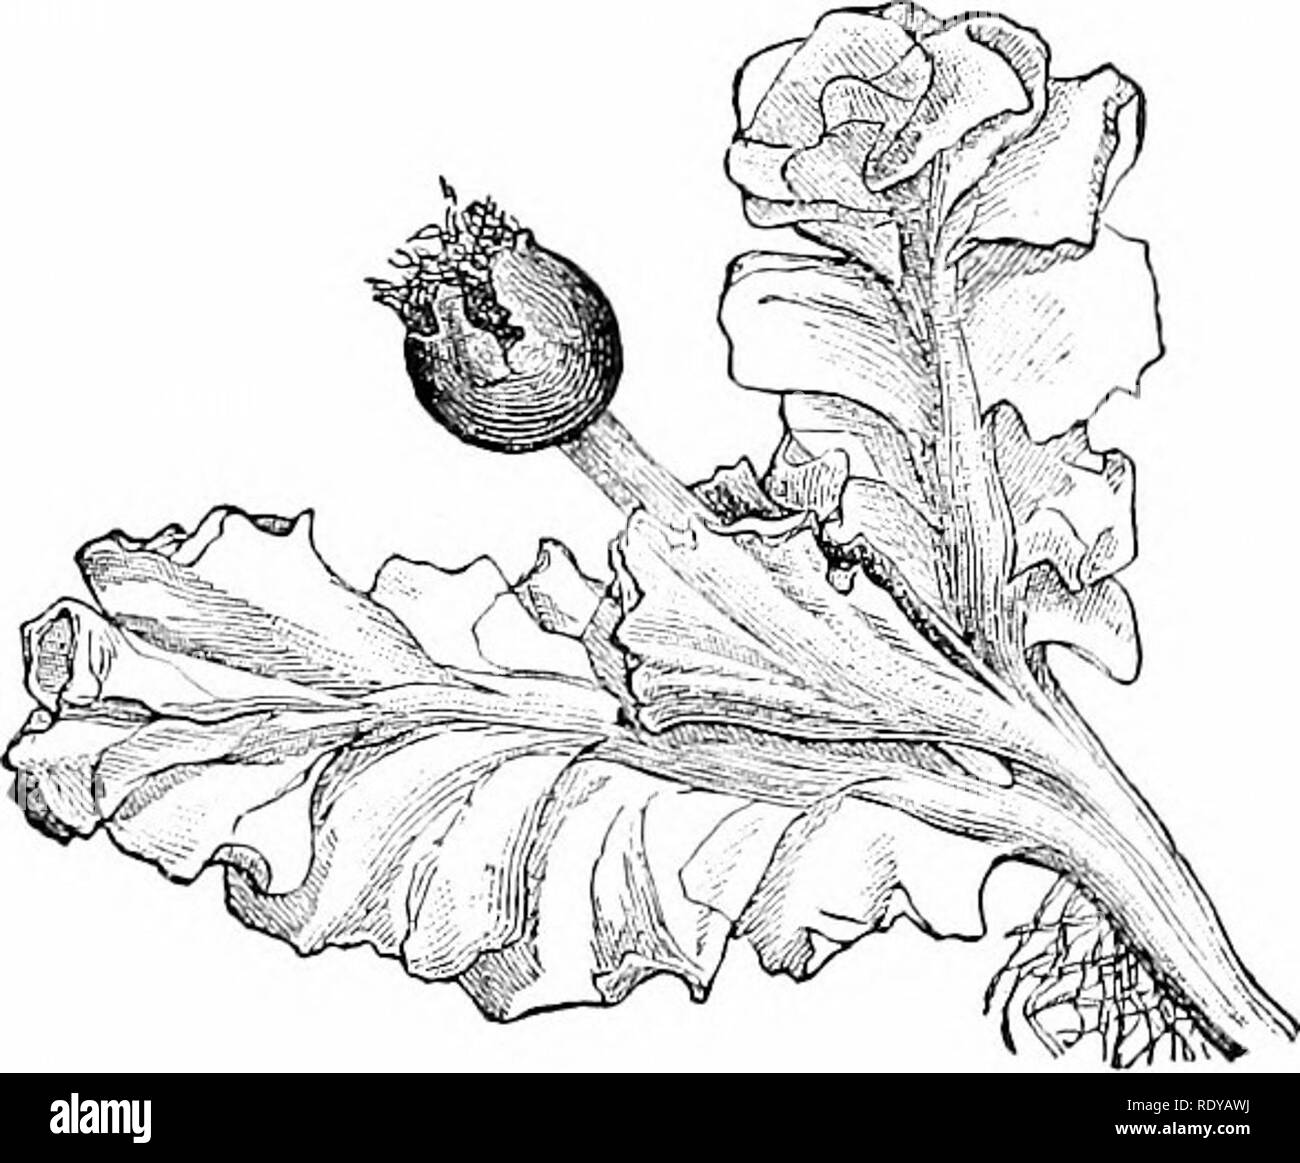 . Plant life, considered with special references to form and function. Plant physiology. Fig. 64. Fi .65. Fig. 64.—Part of a plant of Blasia pusilla. The flaltfned lobed thallus is the gametophyte; the stalked capsules (one youni&lt;, one bursted) are two sporophytes attached to it. Magnified 4 diam.—After Schiffner. Fig. 65.—Gametophyte and sporophyte of Fossombronia cristata. The thallus is so deeply lobed thai the divisions are usually called leaves. Magnified 15 diam.— After Schiffner.. Please note that these images are extracted from scanned page images that may have been digitally enhanc Stock Photo